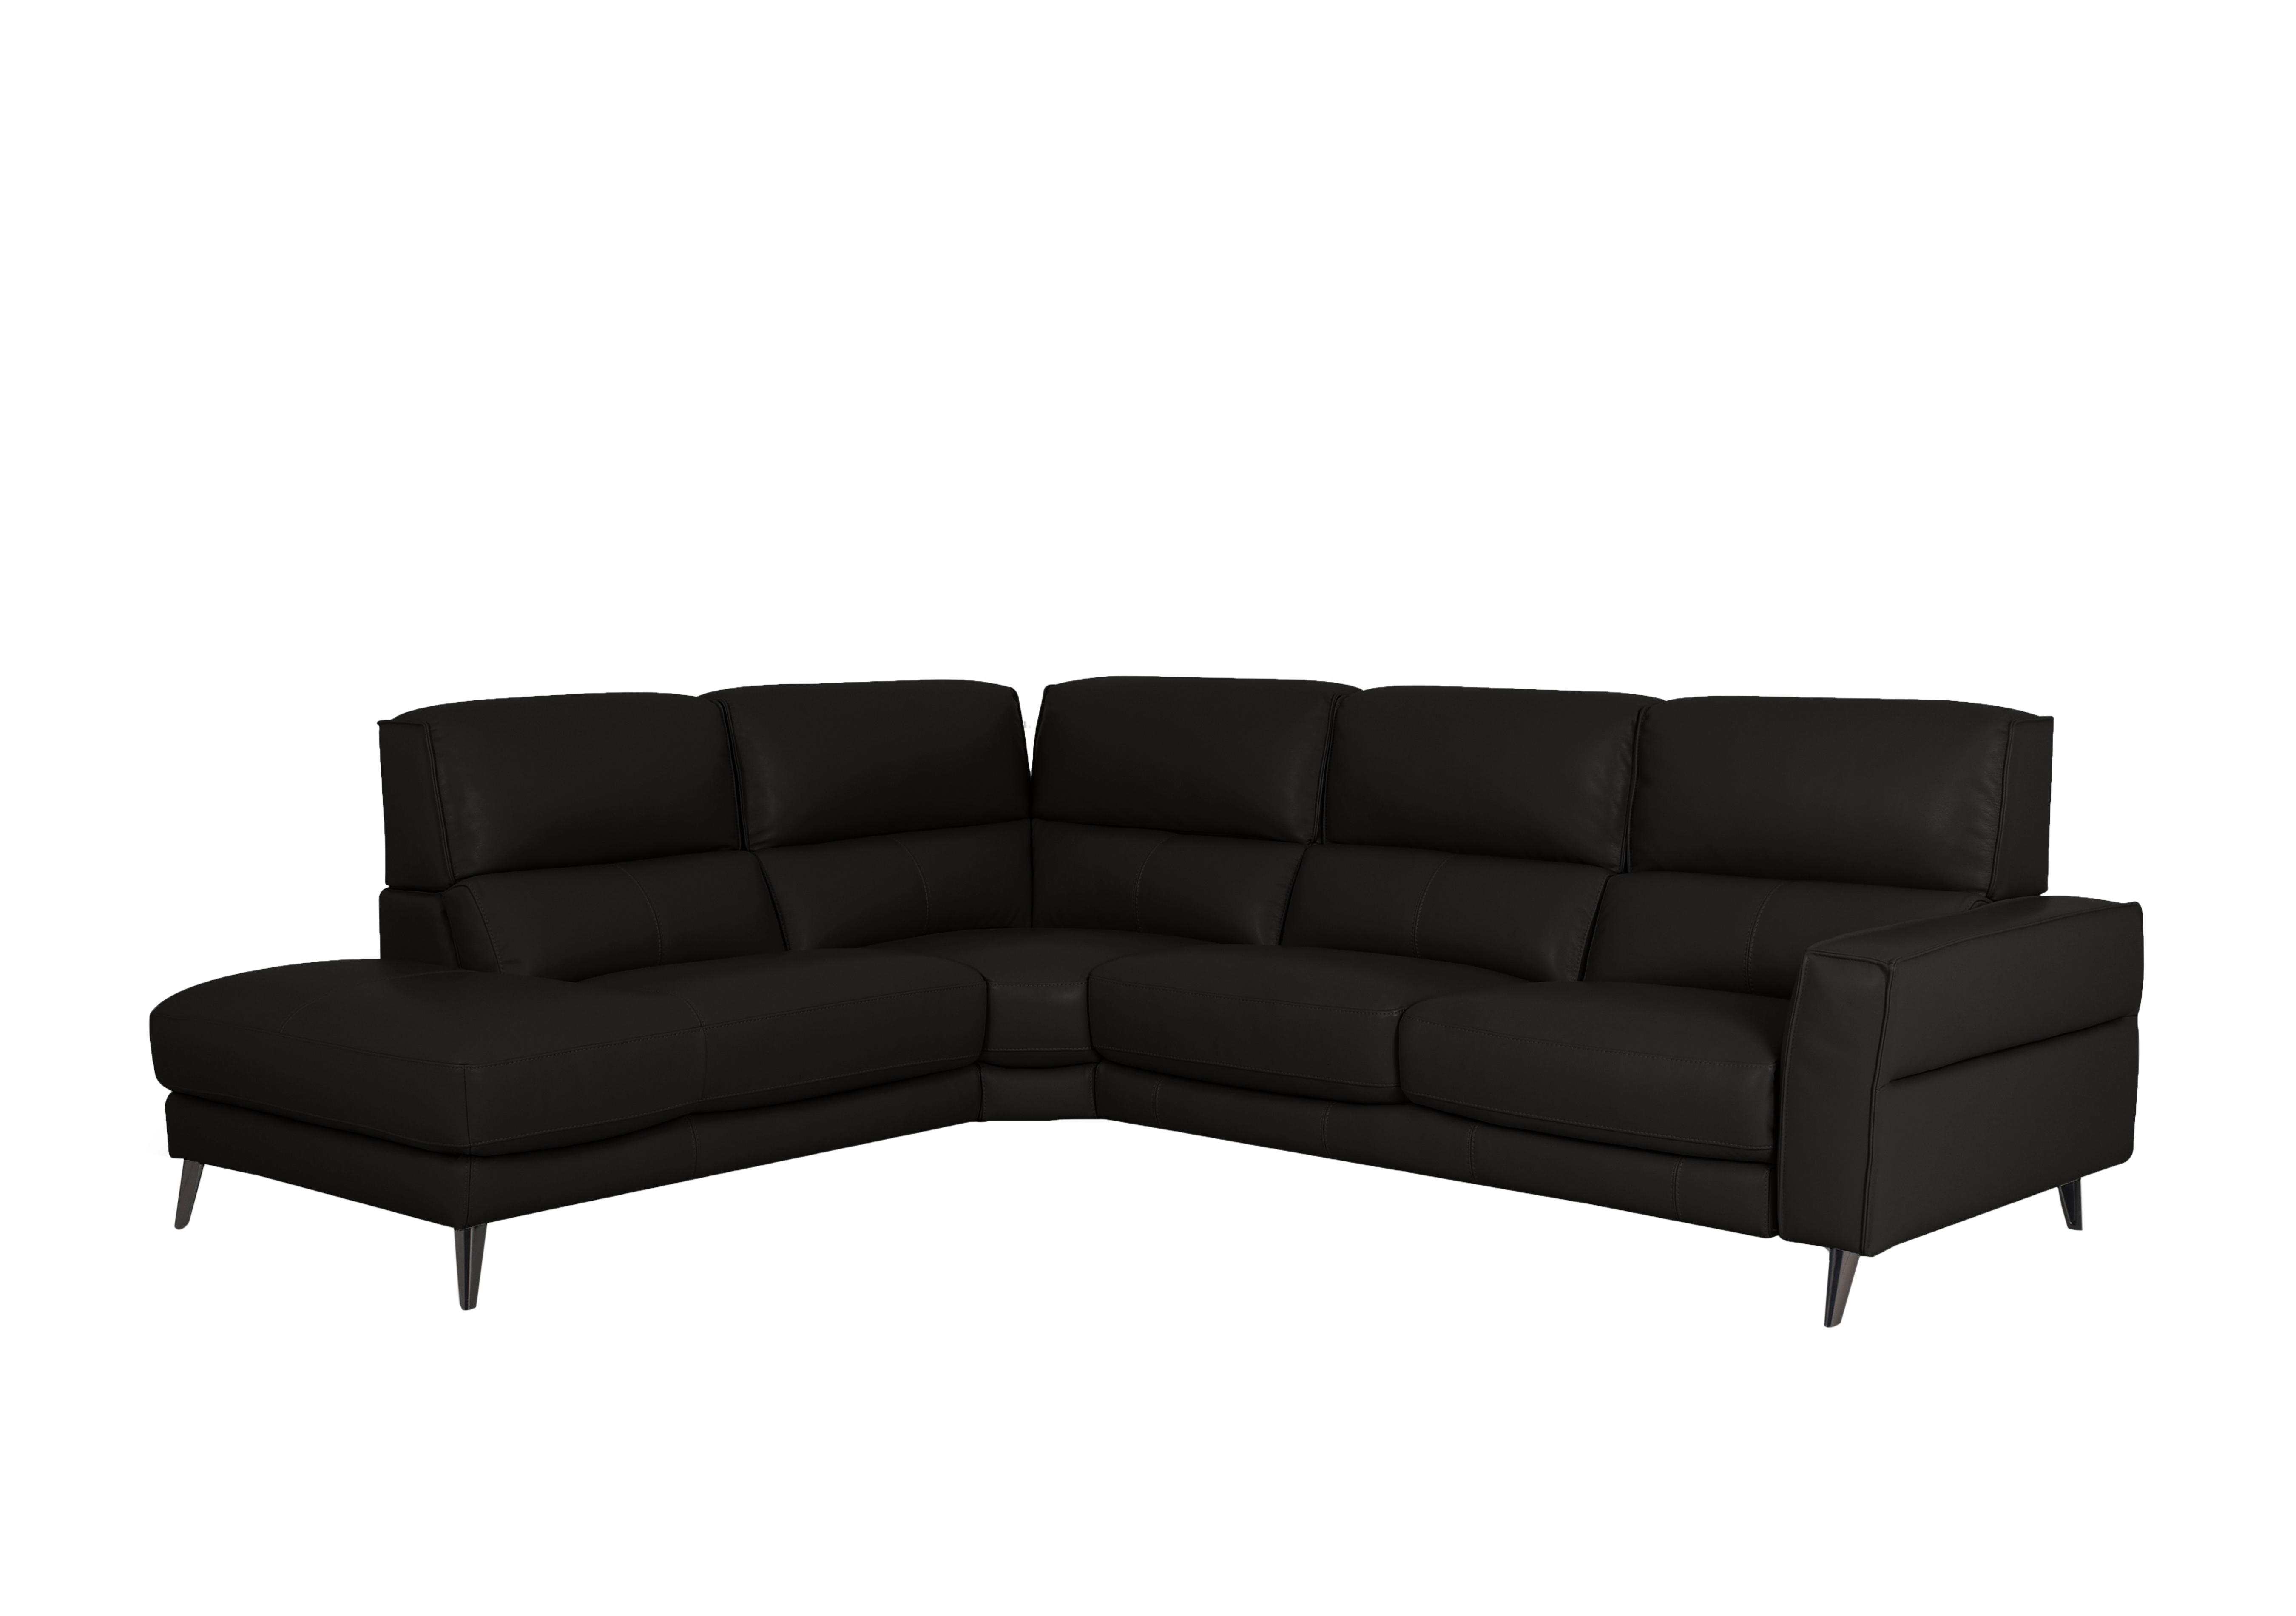 Axel Leather Chaise End Sofa in Bv-3500 Classic Black on Furniture Village